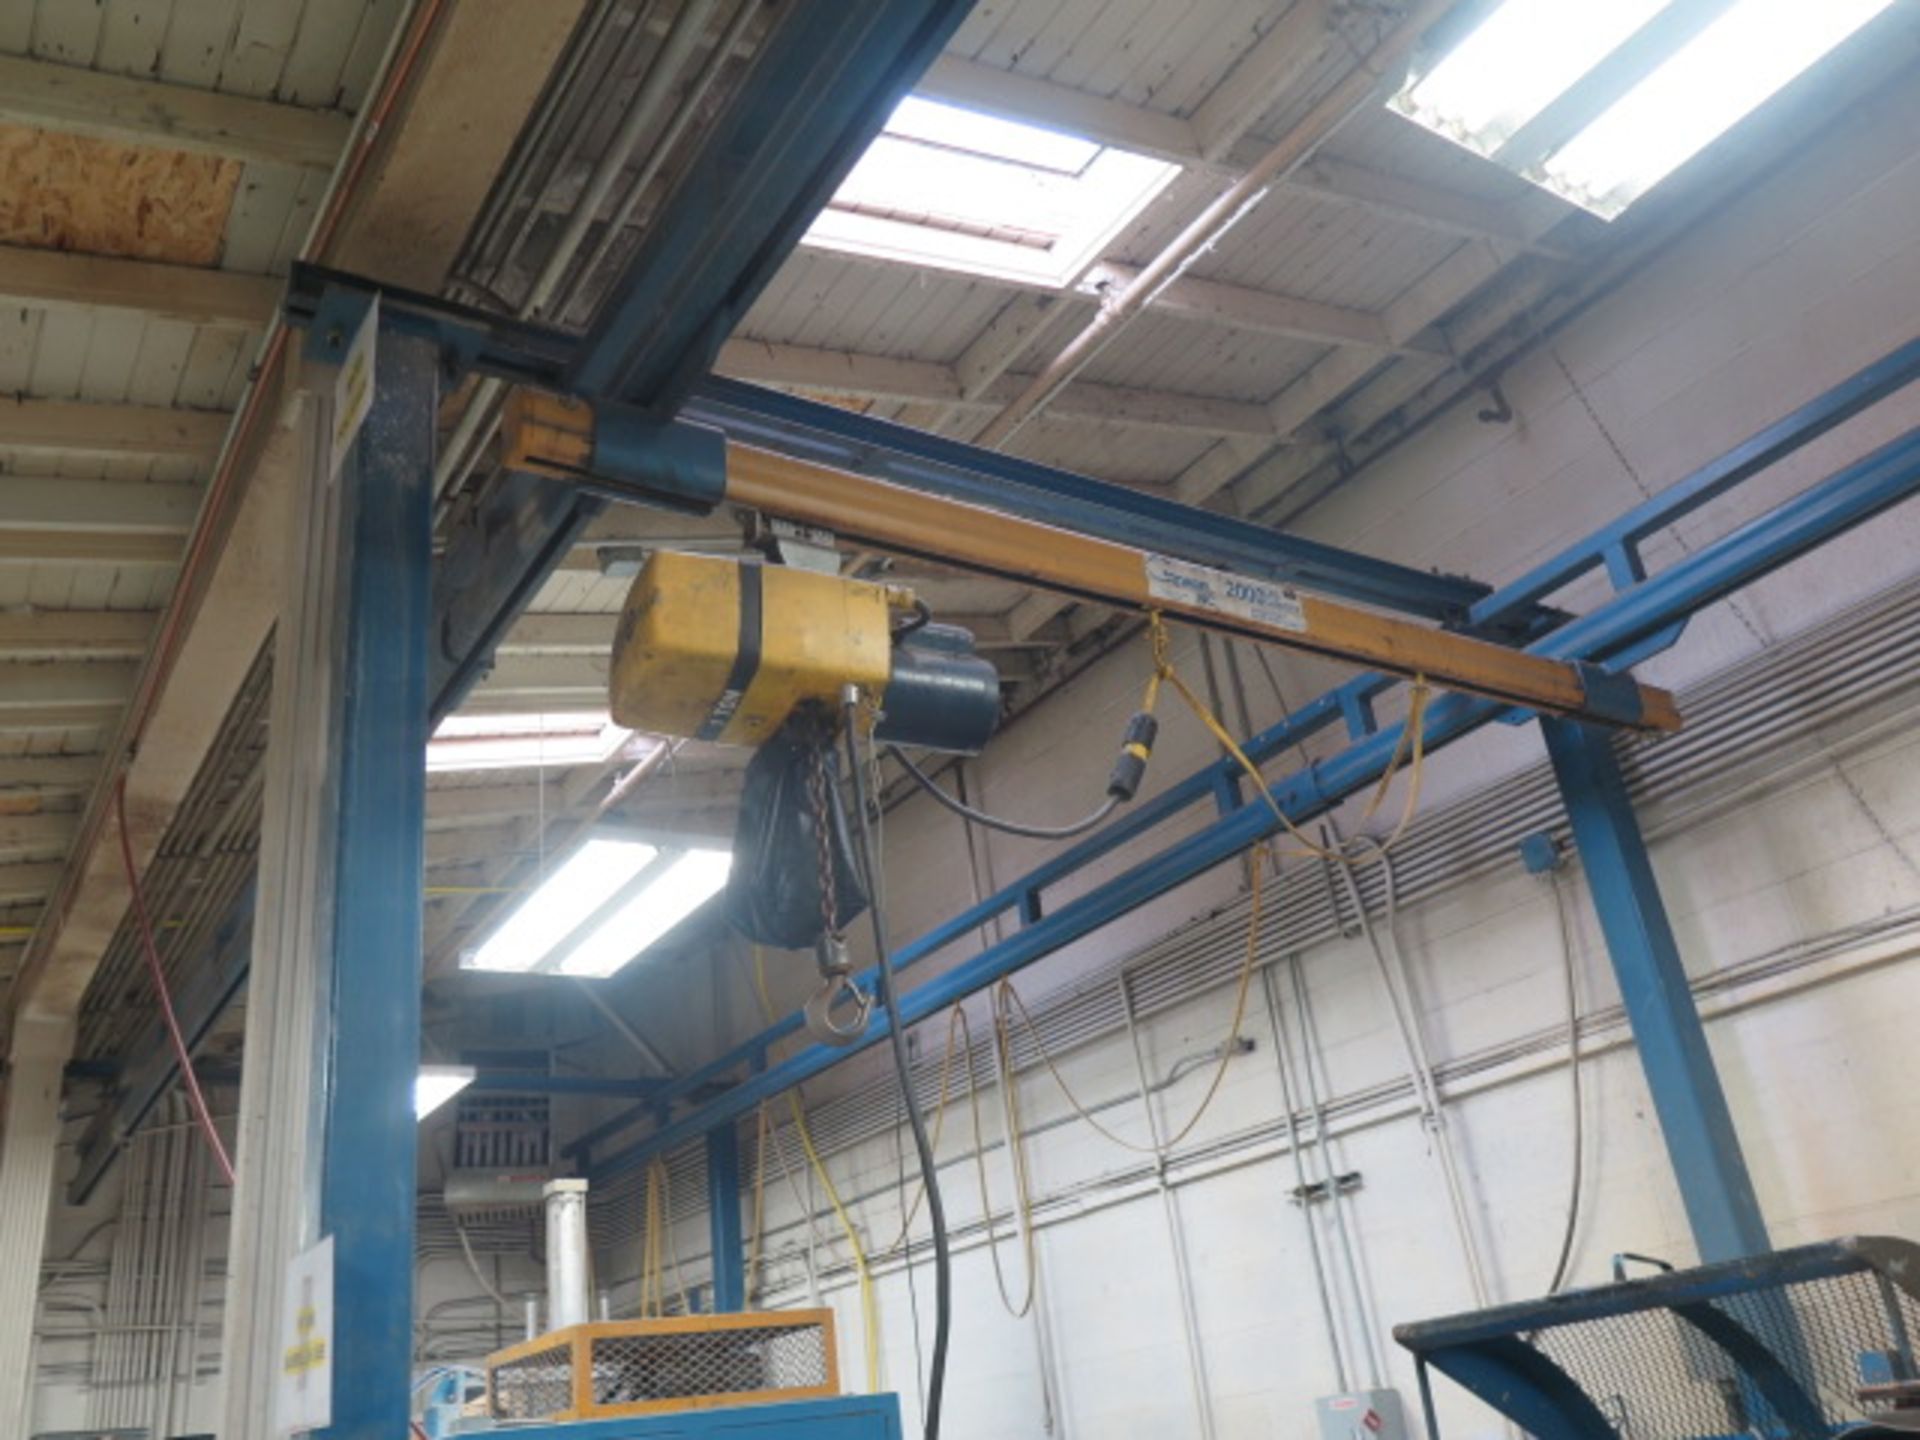 Gorbel 8-Post Free-Standing Gantry System w/ 1 Ton Electric Hoist(SOLD AS-IS - NO WARRANTY) - Image 4 of 8